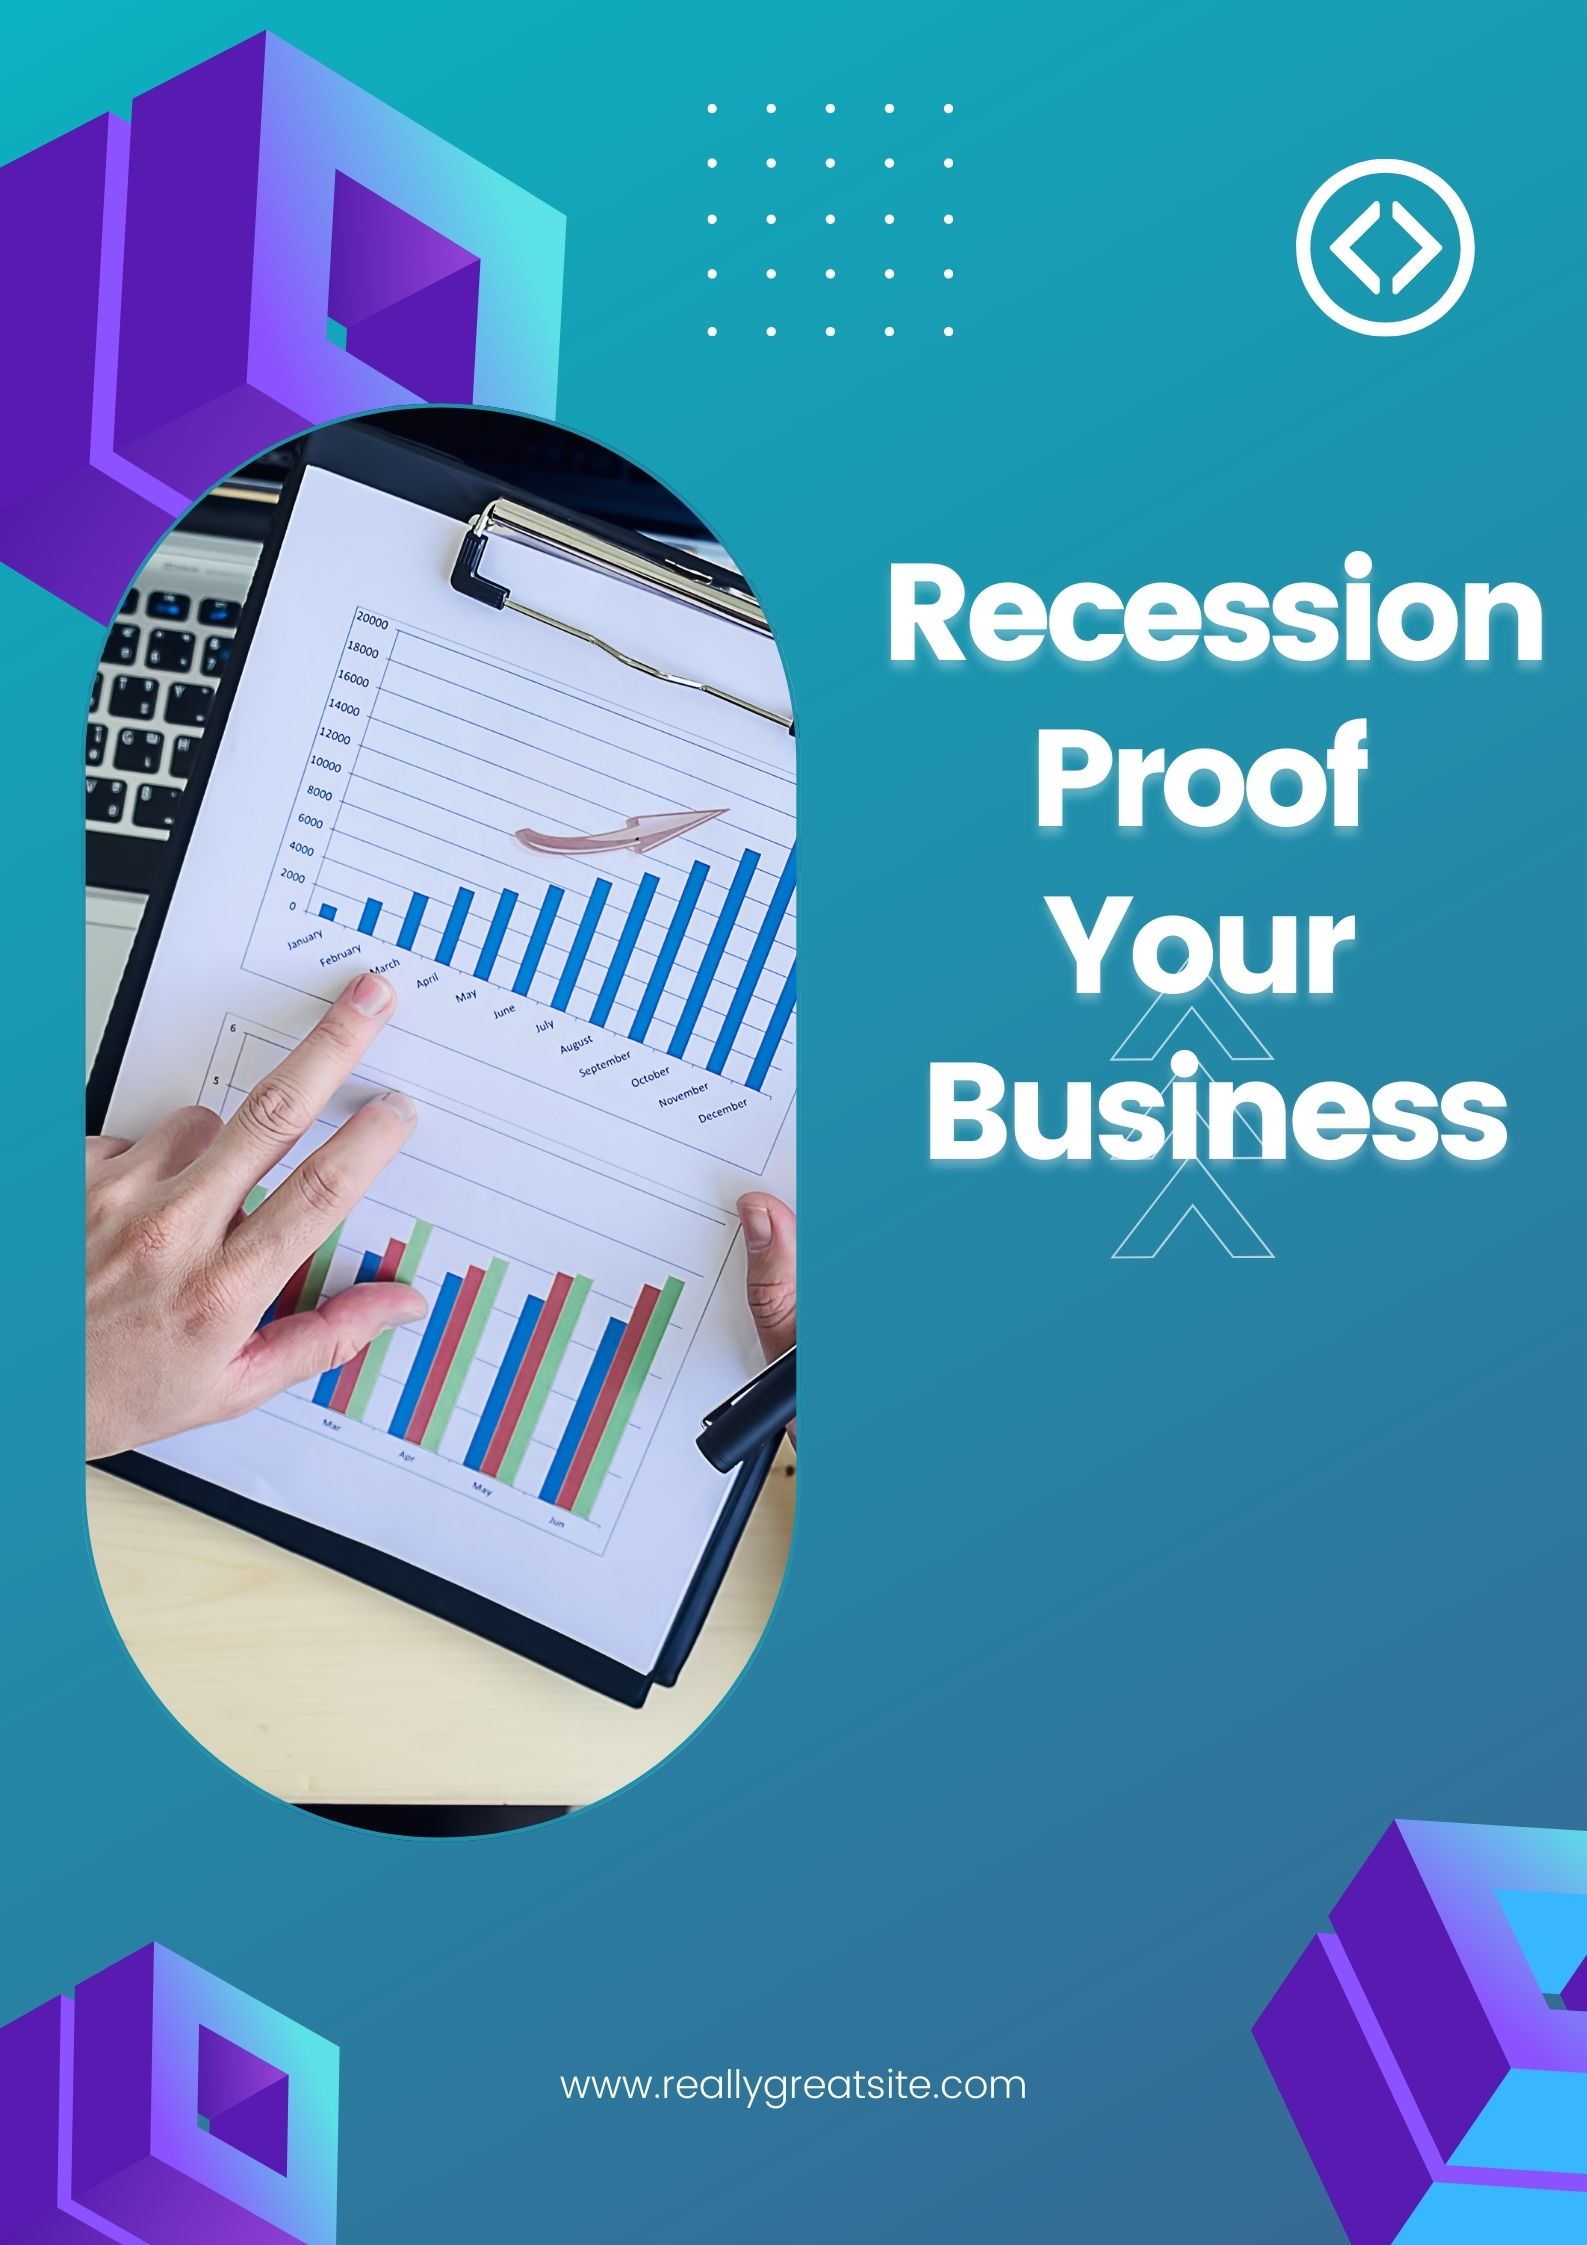 Recession Proof your business